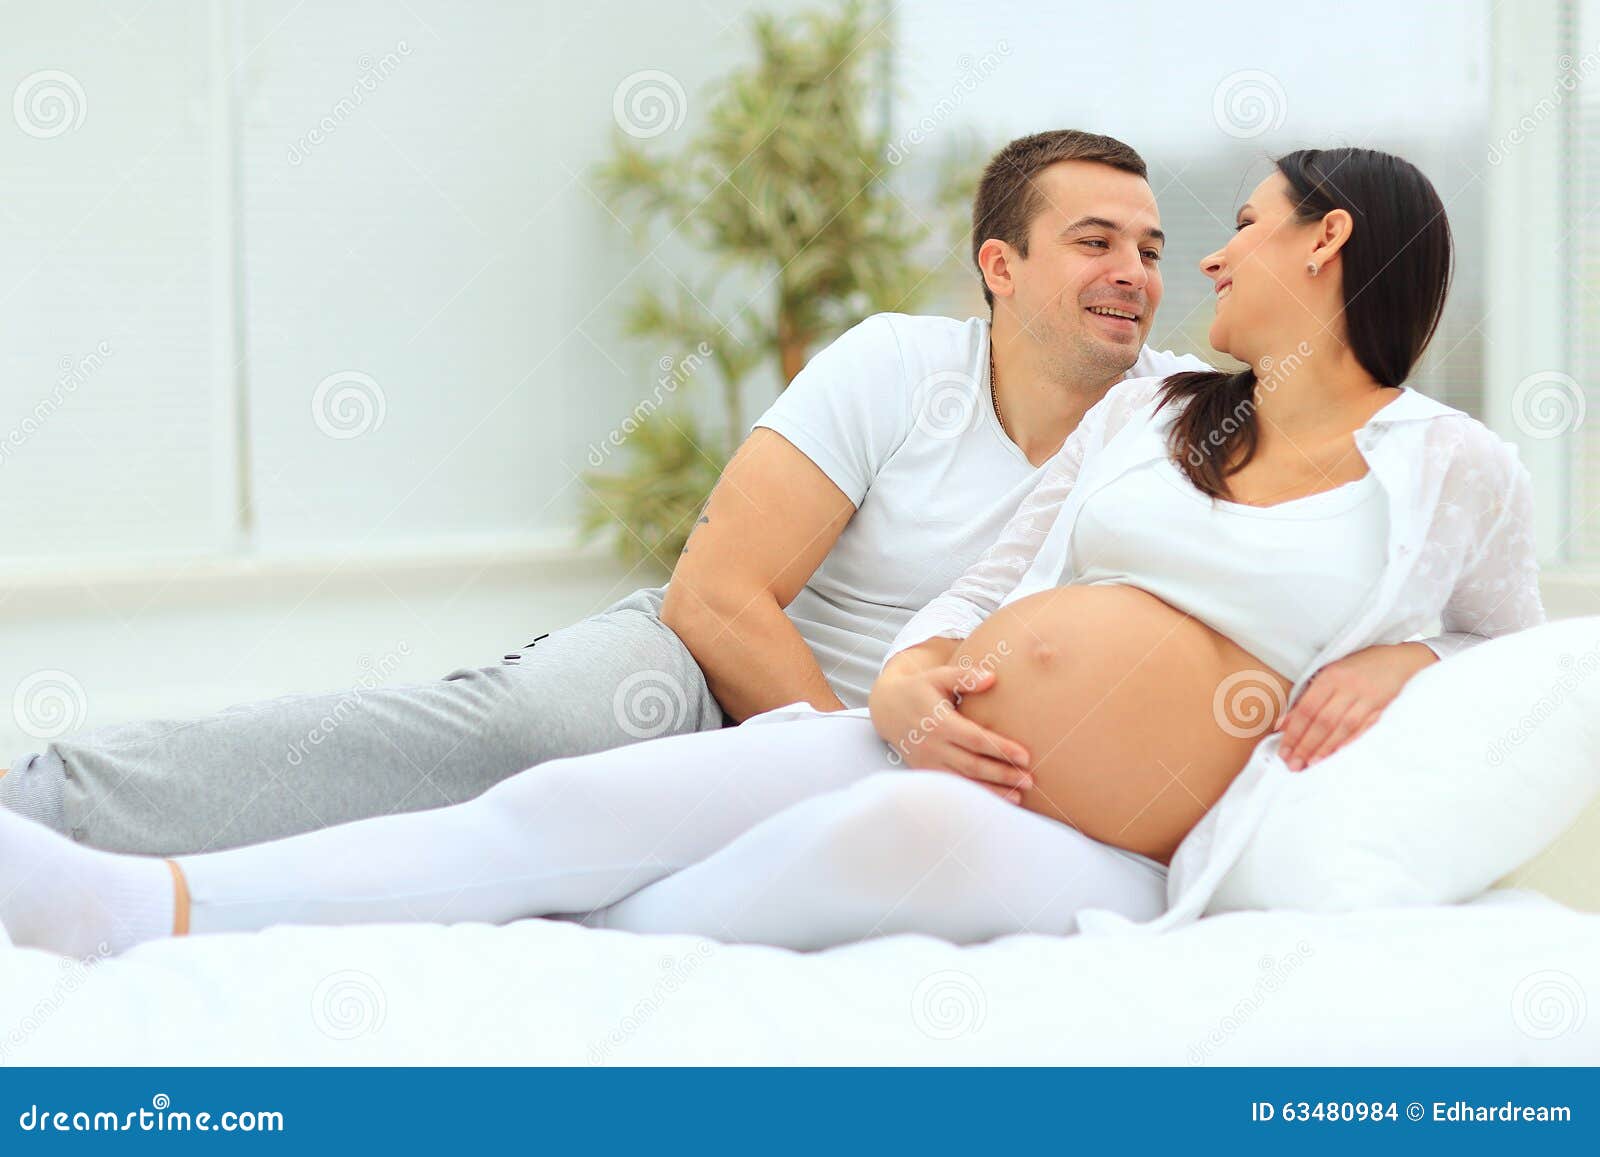 Man Looks Lovingly At His Pregnant Stock Photo - Image of ...